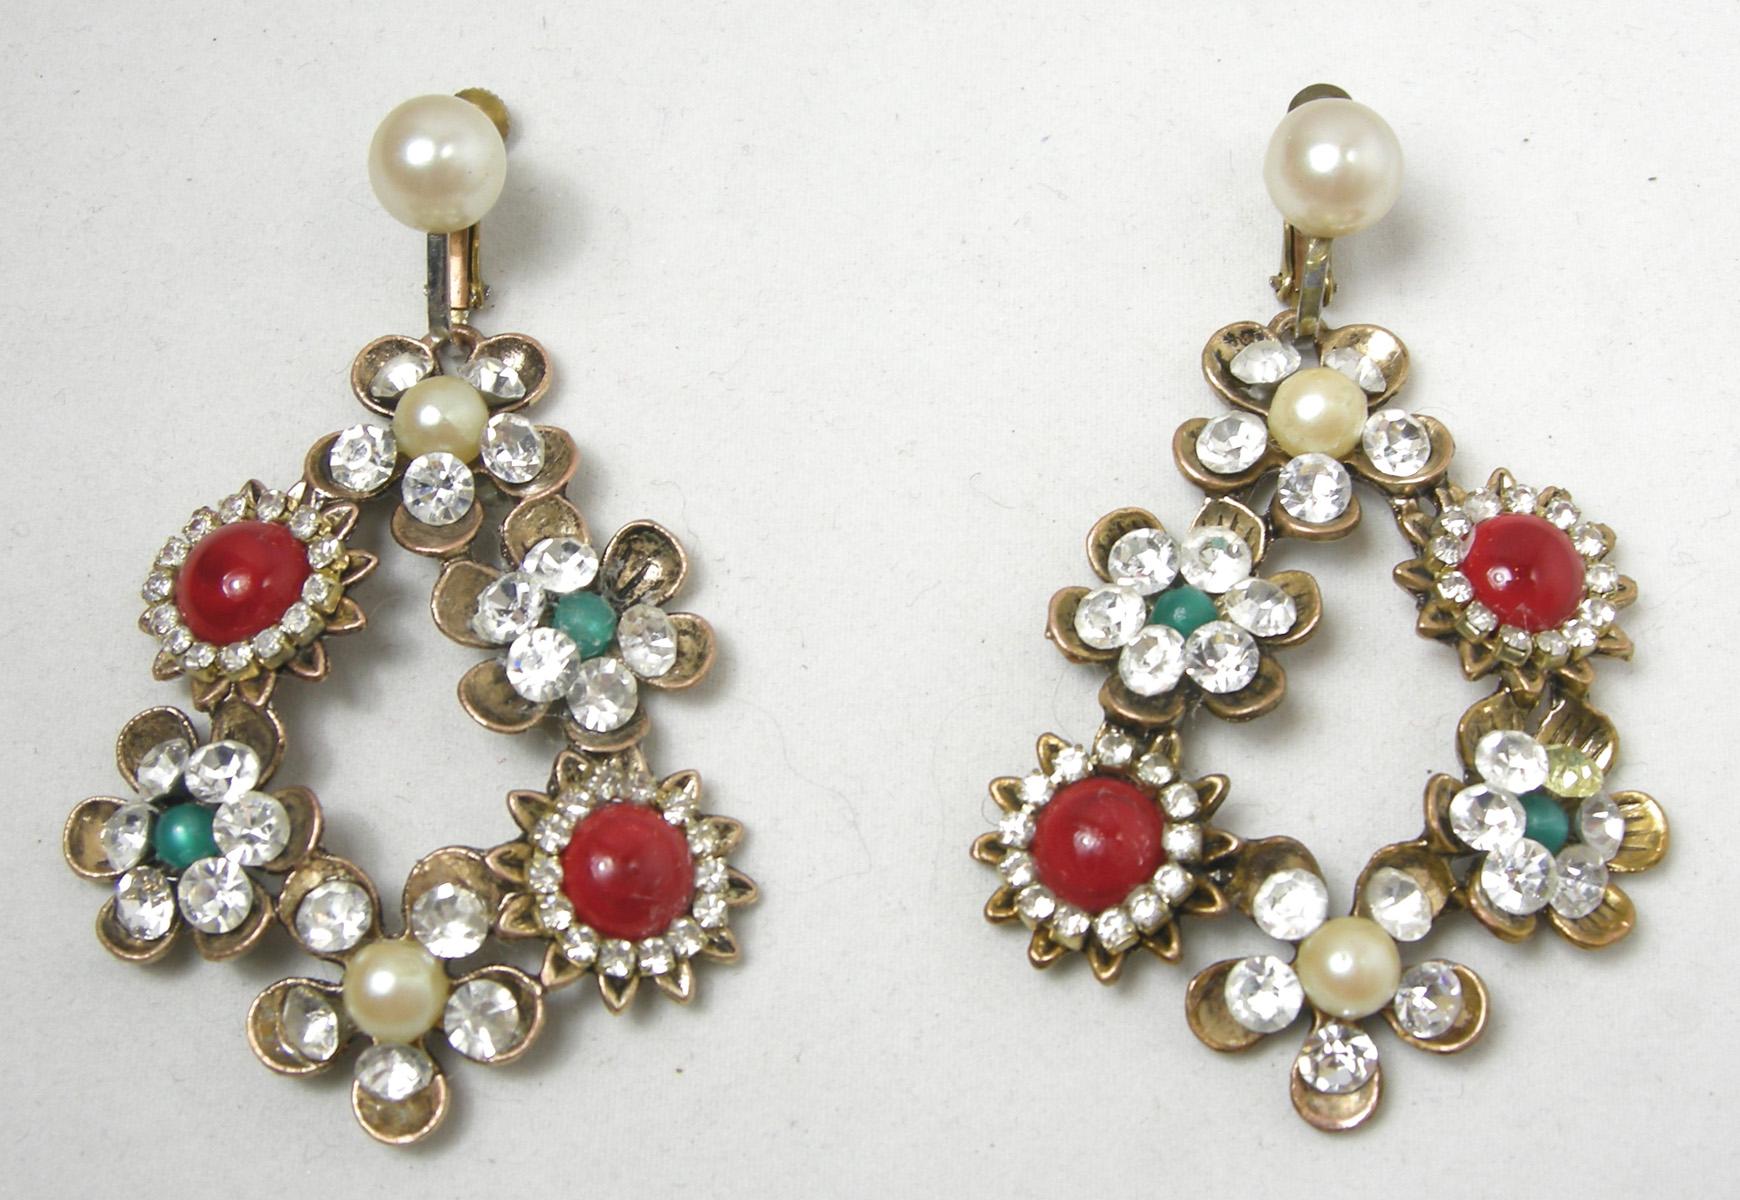 These vintage earrings feature a floral design with faux pearls, clear crystals with red and green bead accents in a gold tone setting.  These clip earrings measure 2-1/2” x 1-5/8 and are in excellent condition.